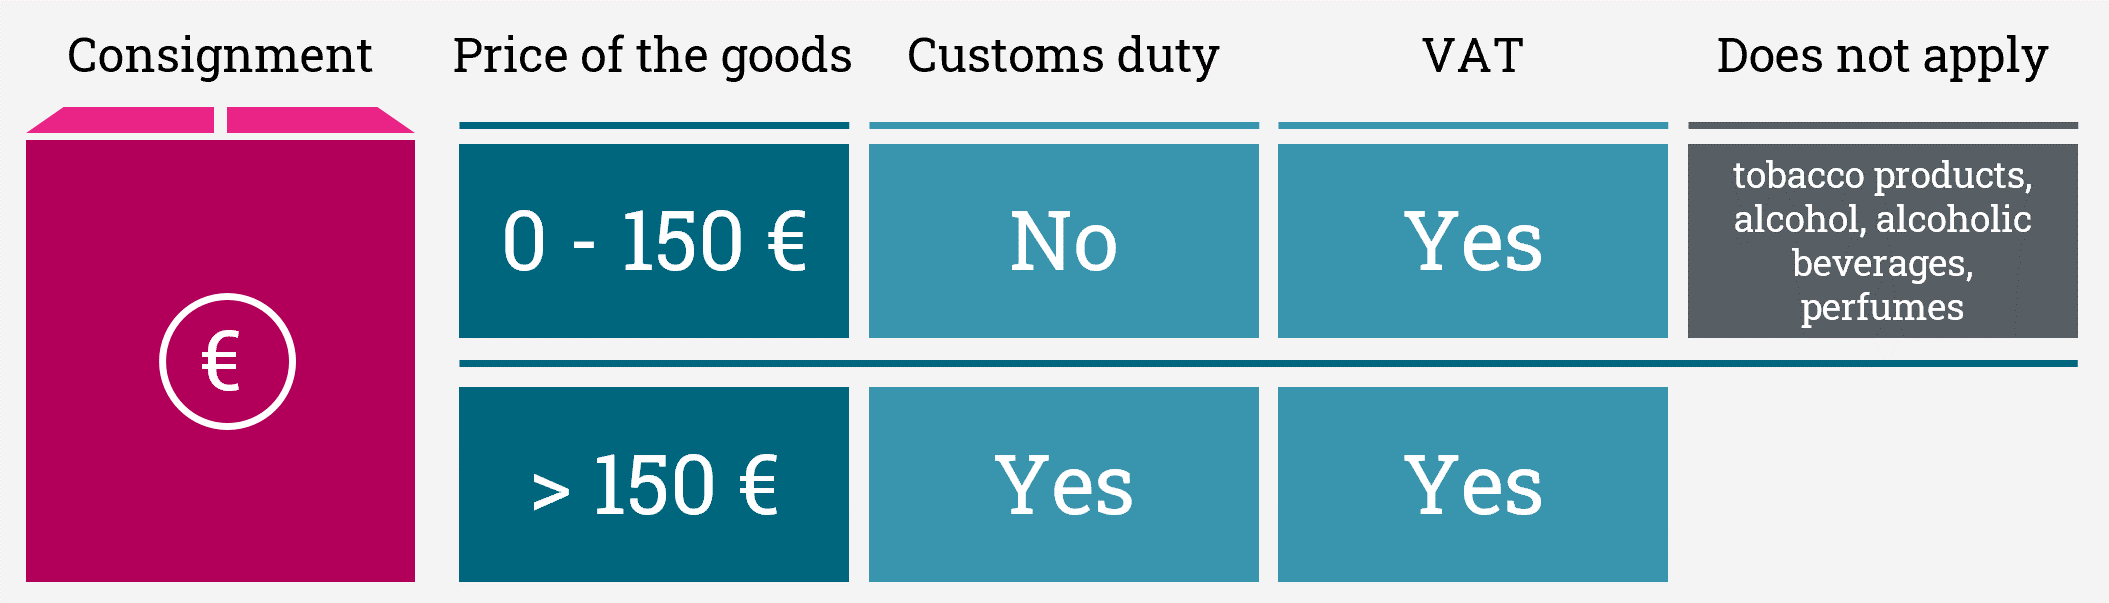 More information on value limits are available on the internet site of the Finnish Customs.